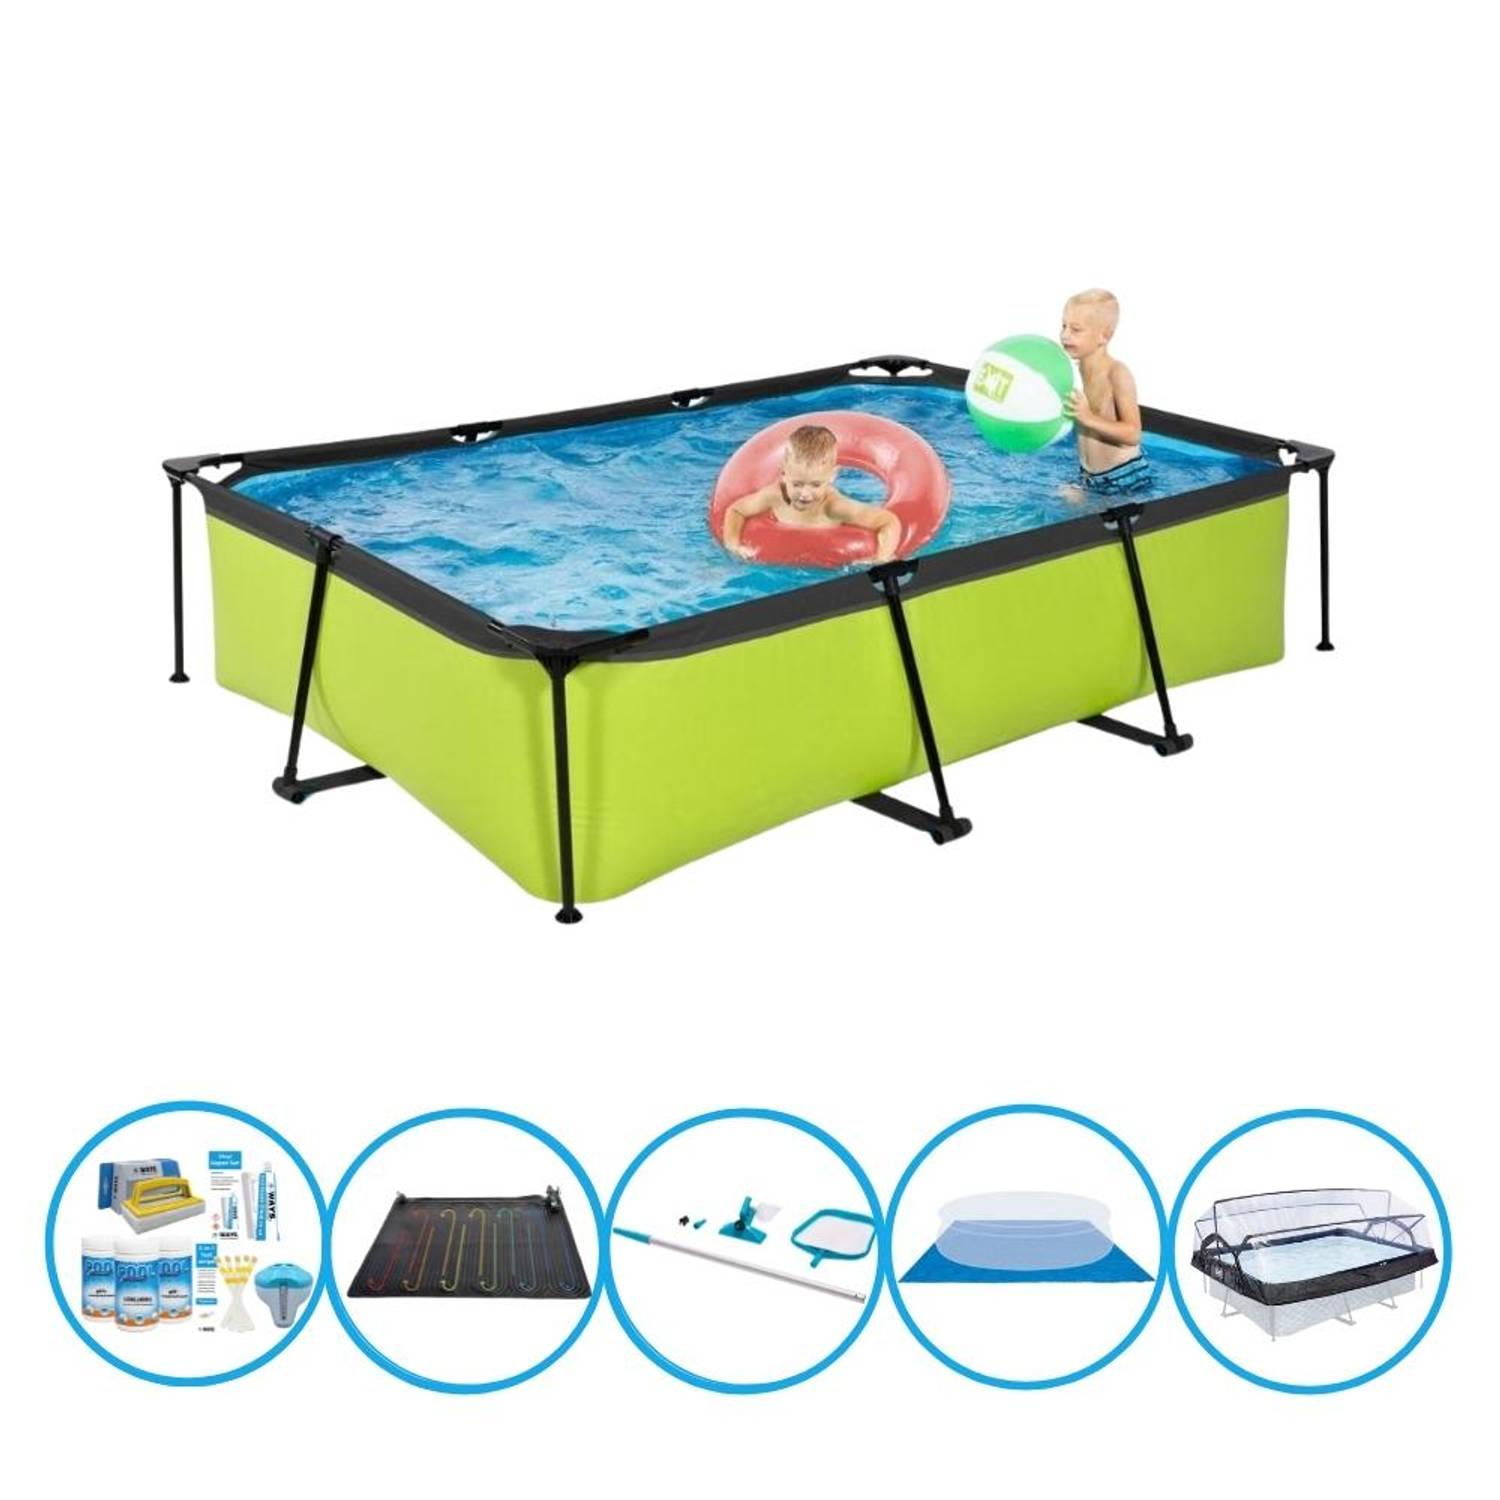 EXIT Zwembad Lime - 300x200x65 cm - Frame Pool - Inclusief accessoires